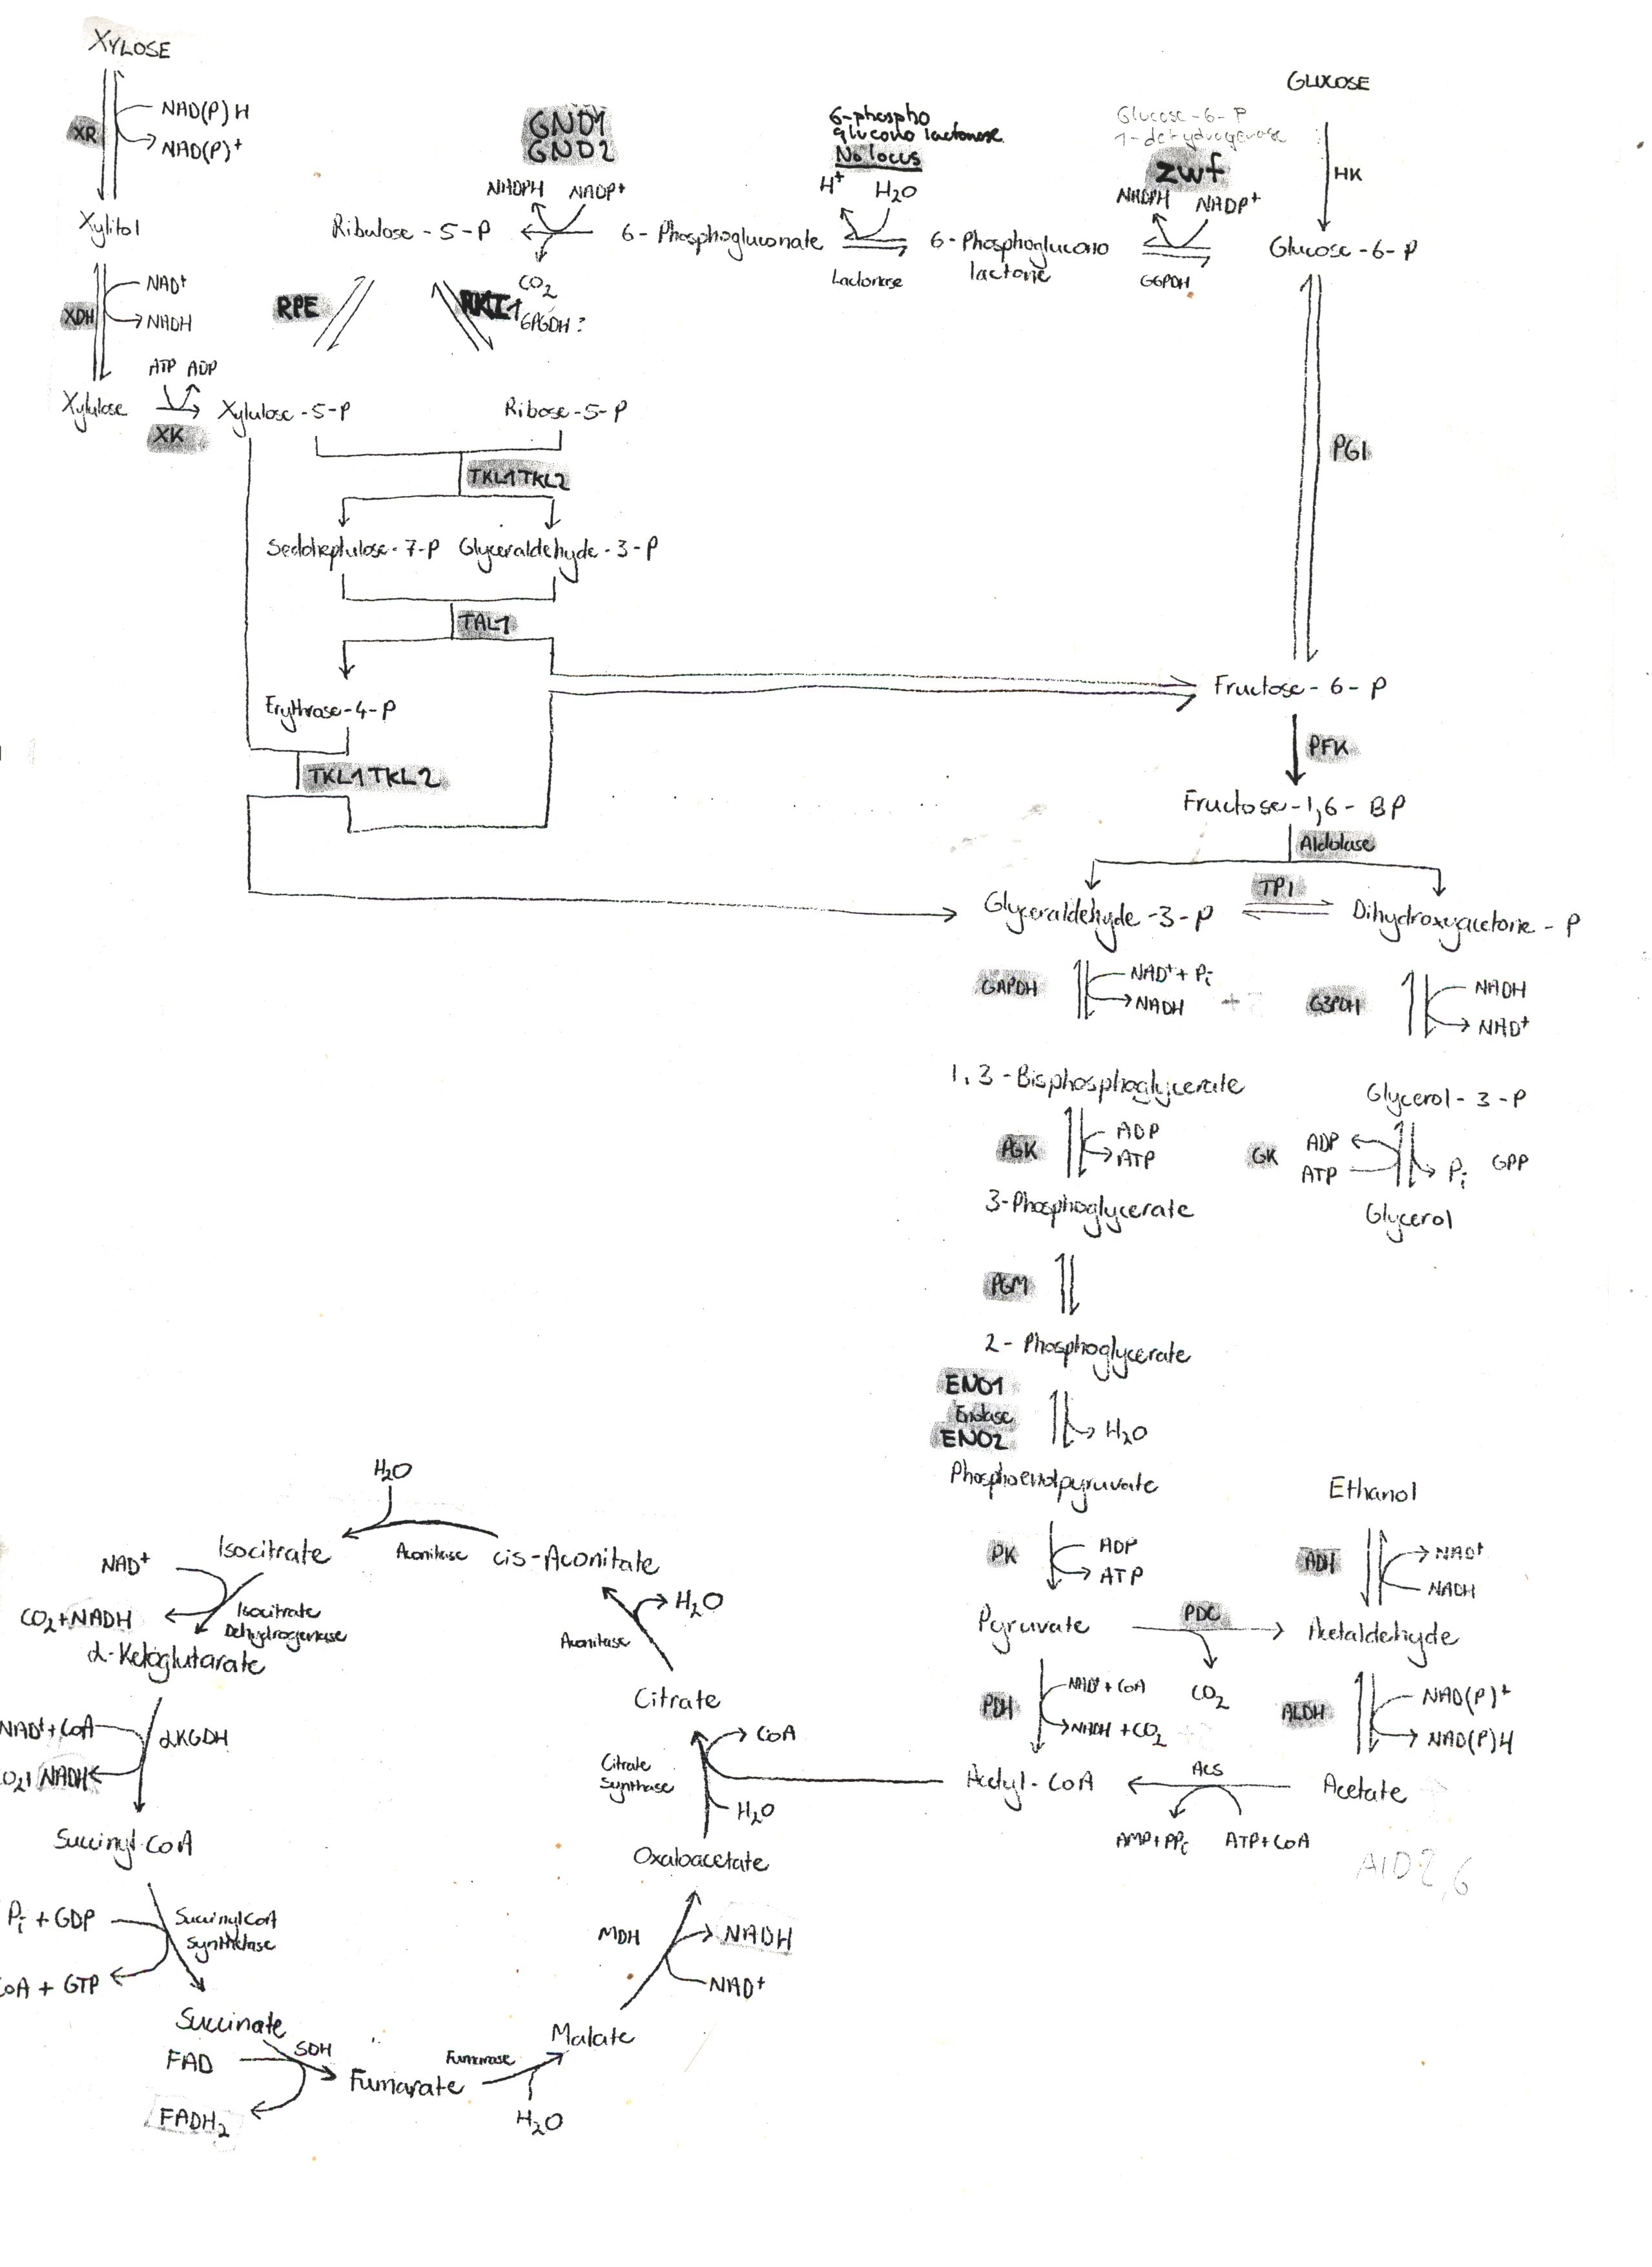 Saccharomyces_cerevisiae_metabolic_map